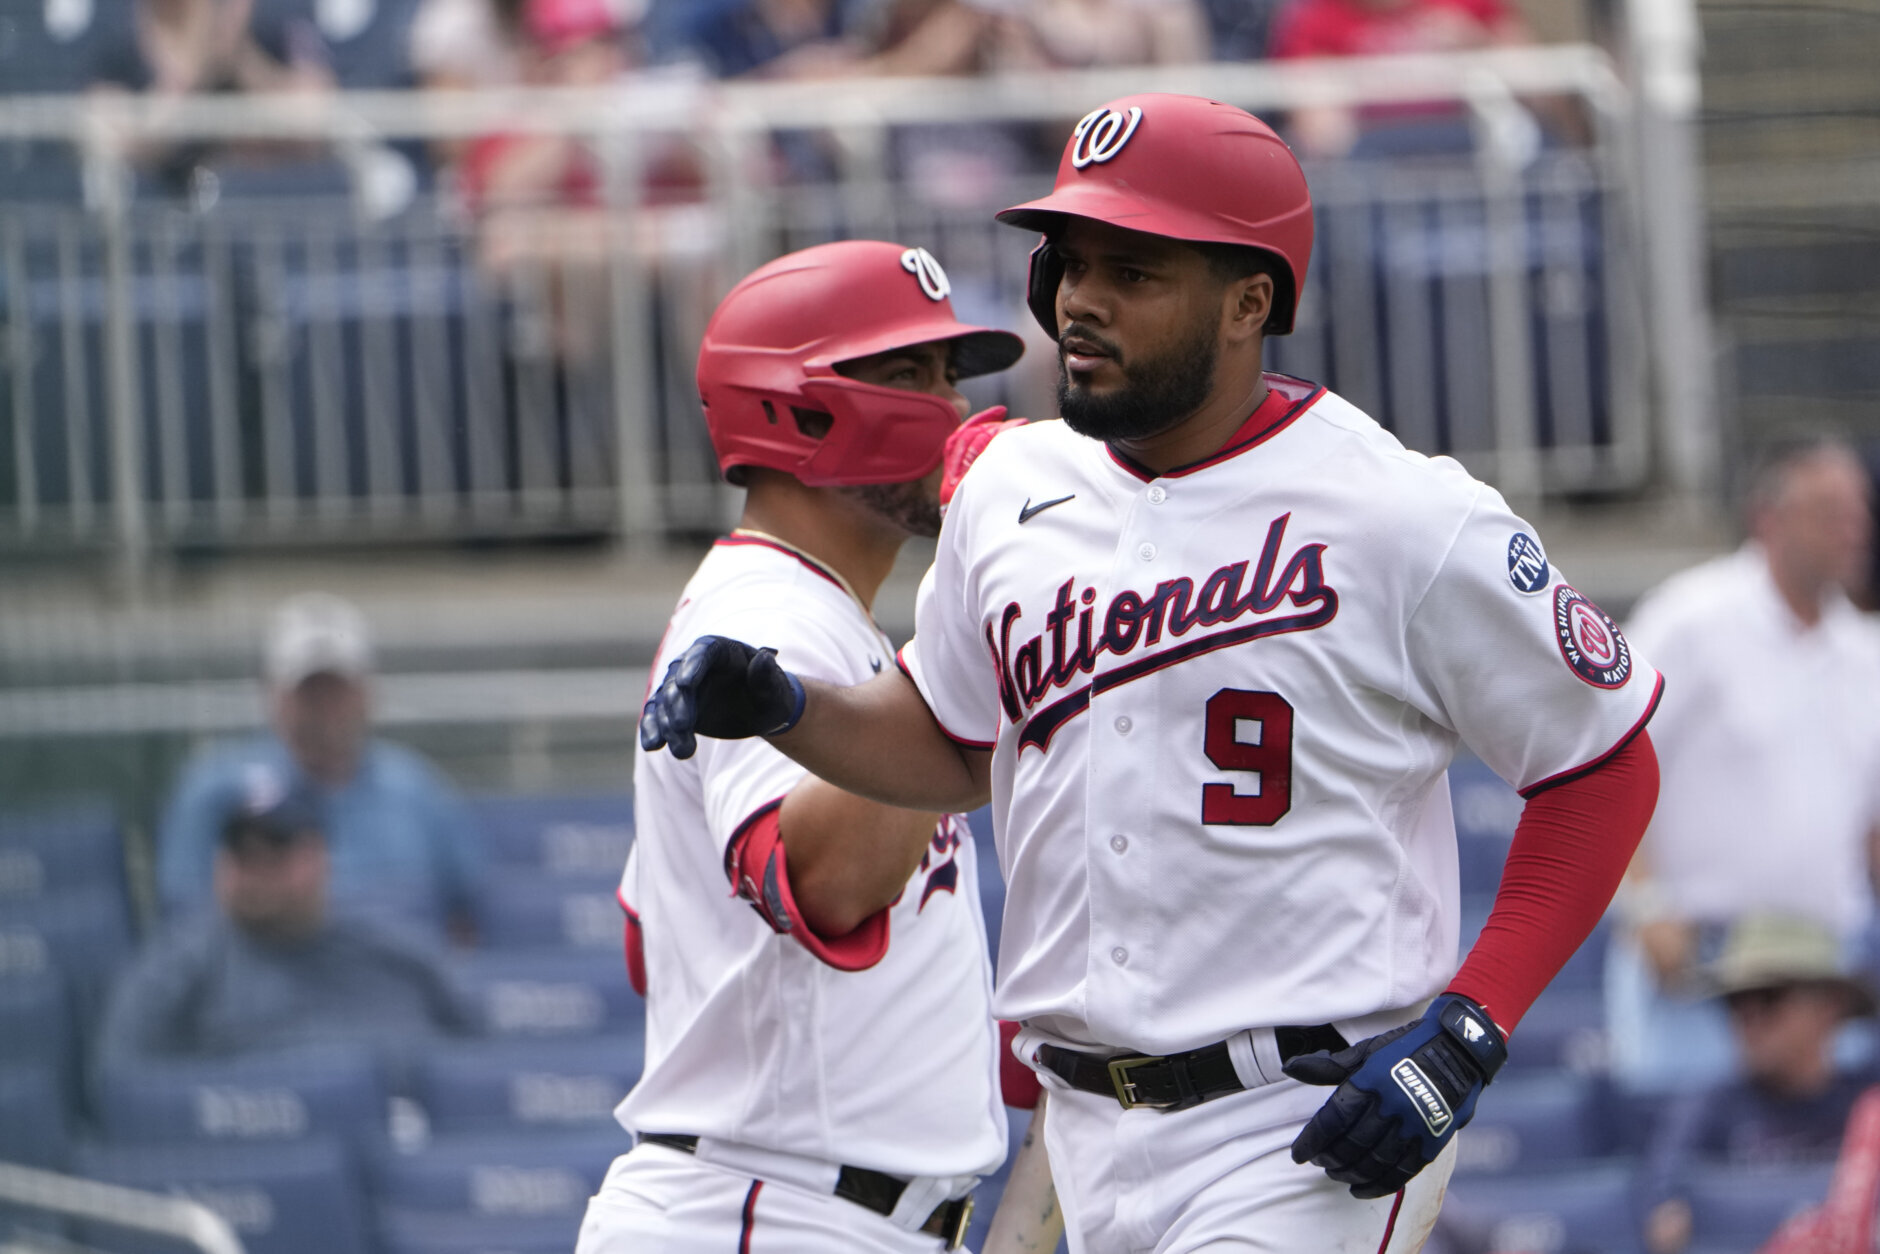 Reviewed call aids Nats' rally in 7-6 win over Guardians - WTOP News